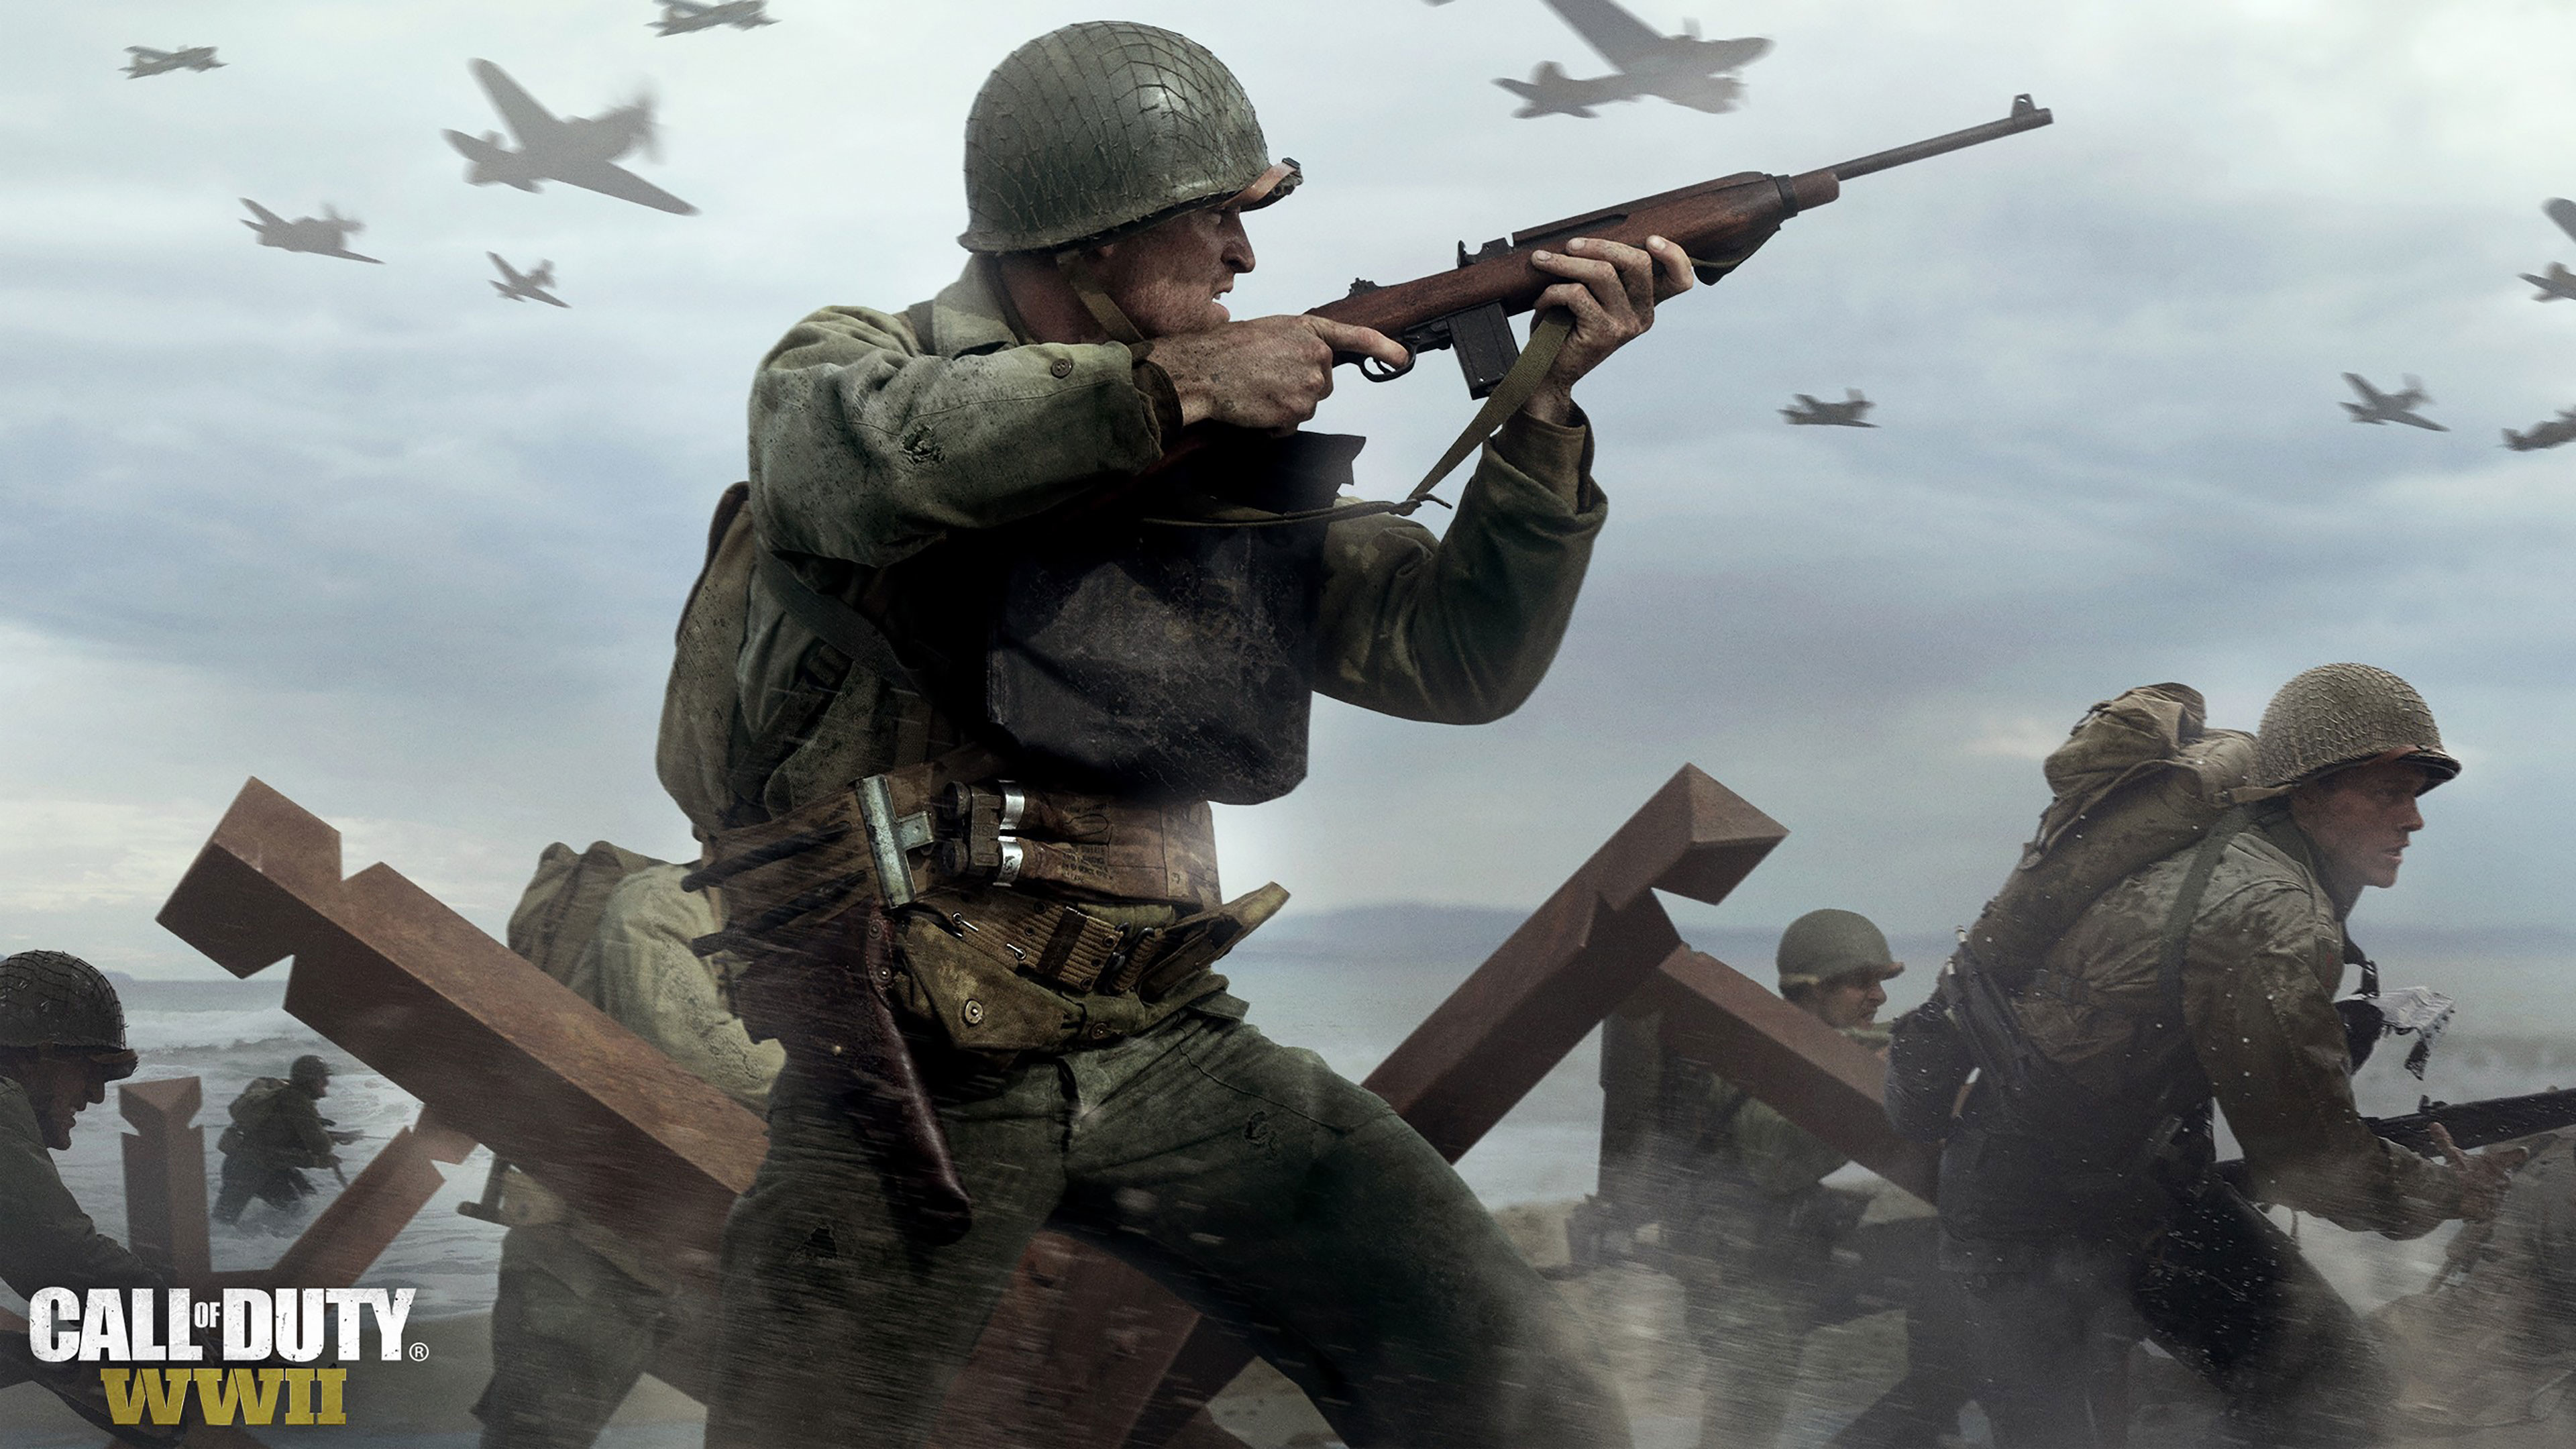 3840x2160 Awesome Call of Duty: WWII Soldiers in War wallpaper